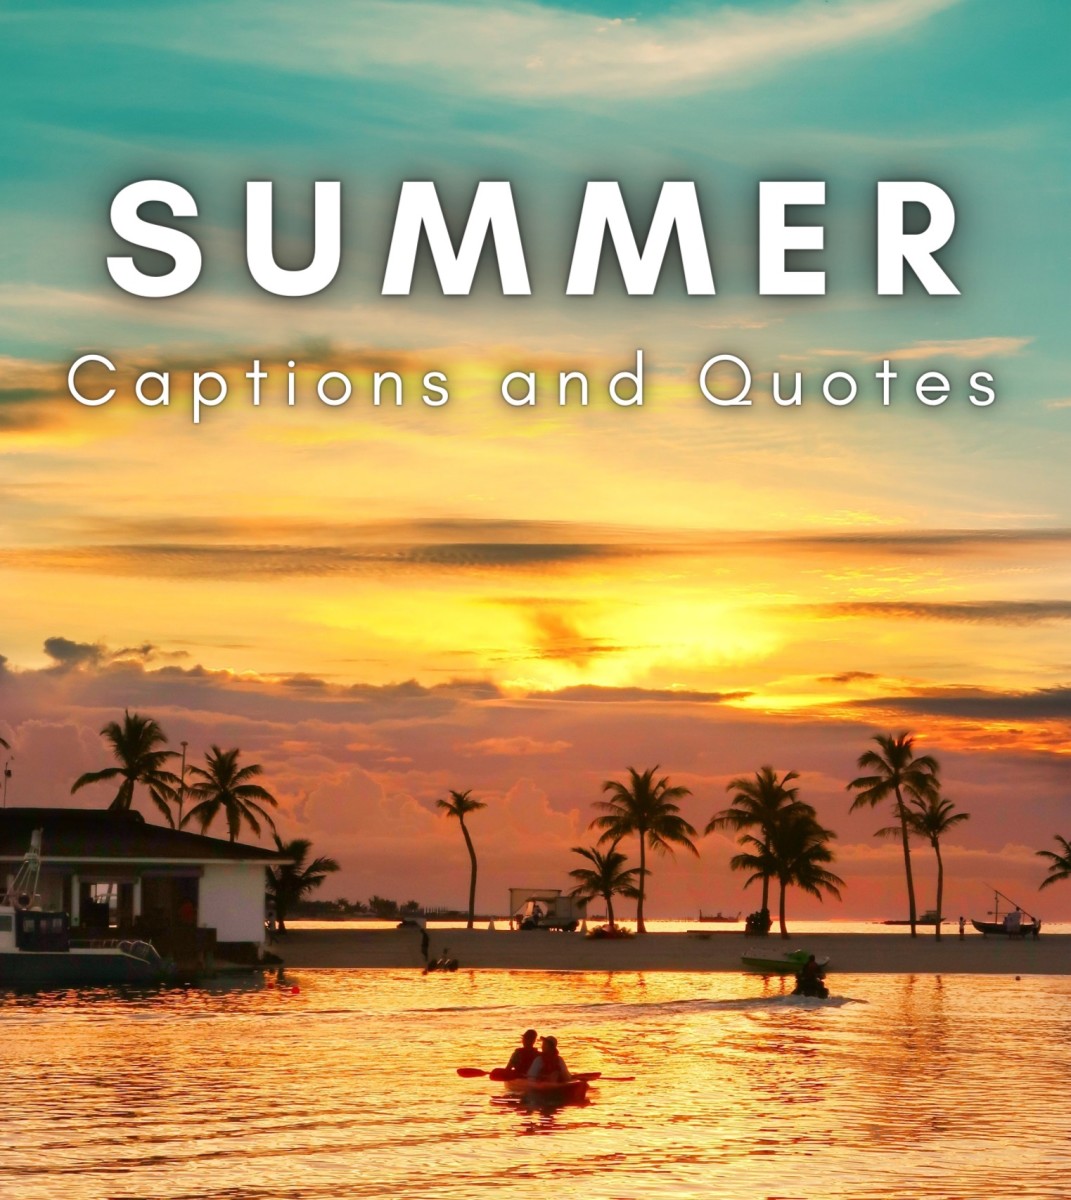 150+ Summer Quotes and Caption Ideas for Instagram - TurboFuture